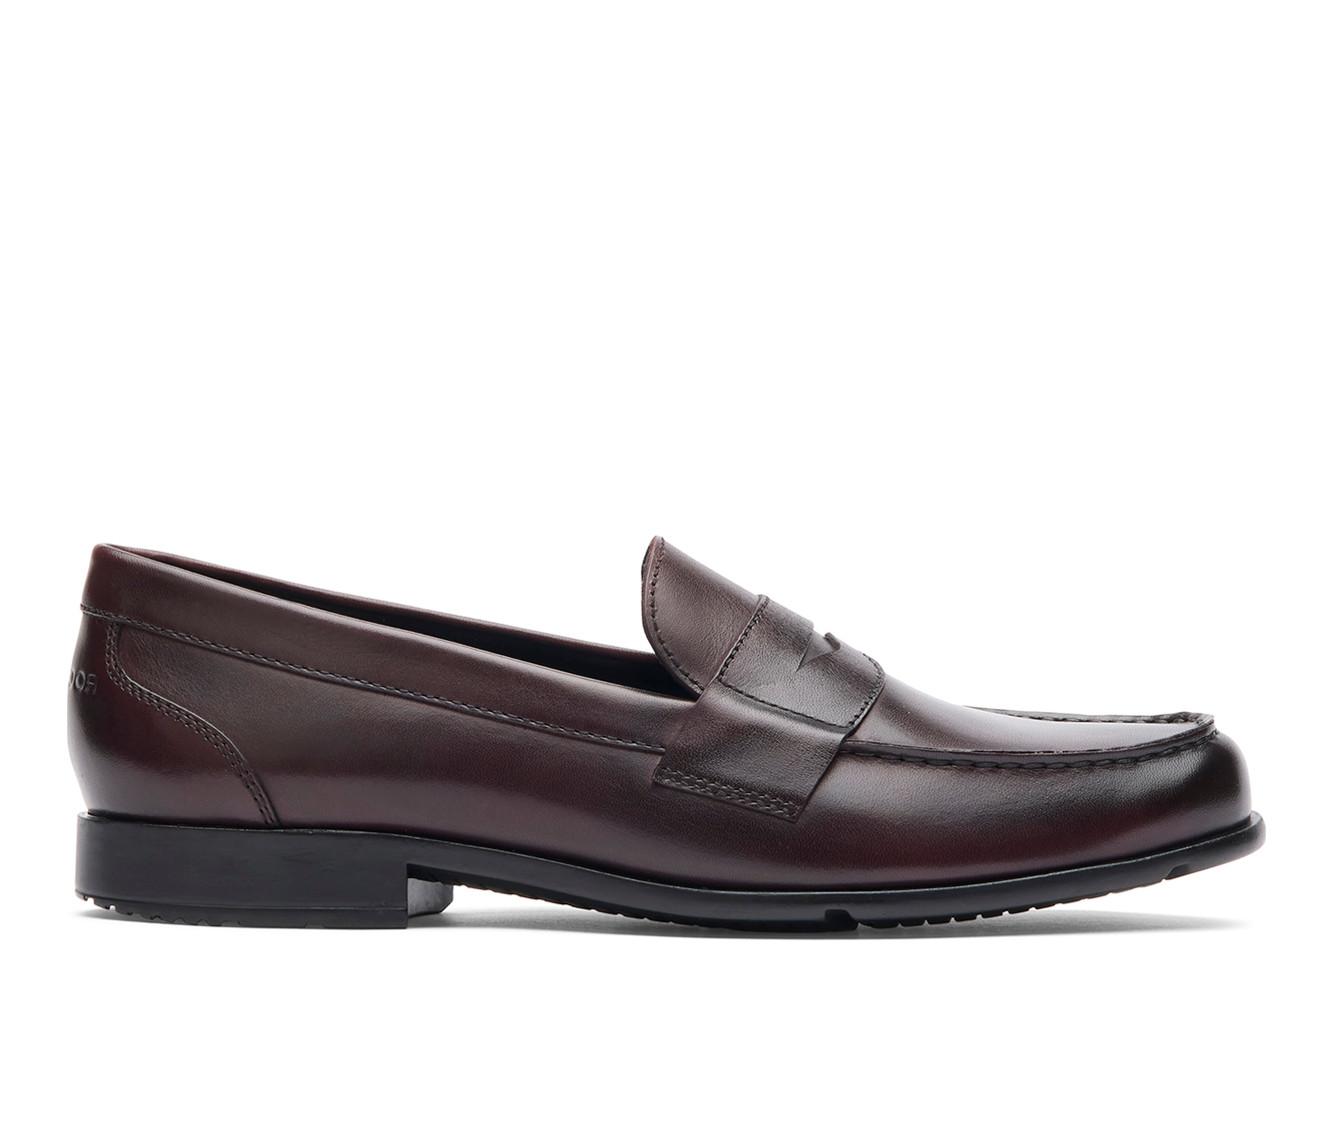 Men's Rockport Classic Penny Loafers